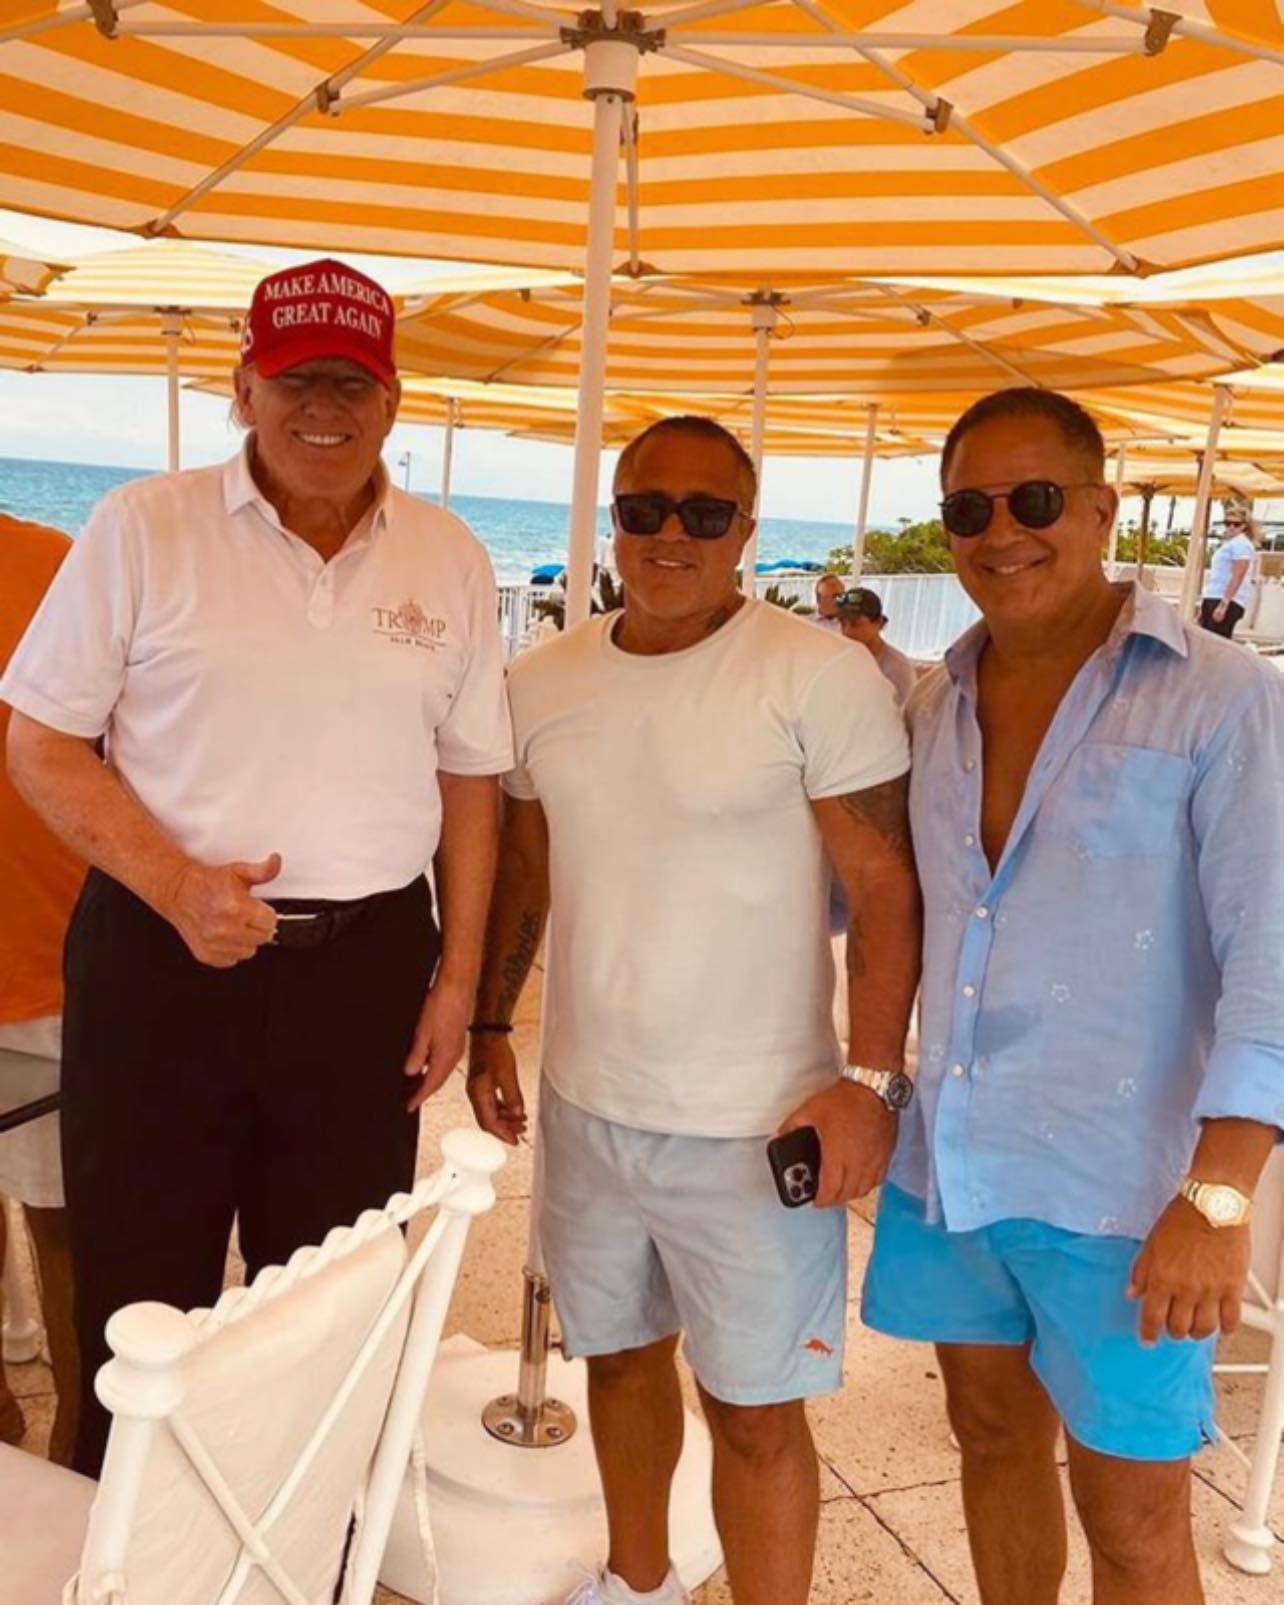 Donald Trump photo posted by John Alite on open Facebook personality page on 9 November 2022, Palm Beach, FL, United States